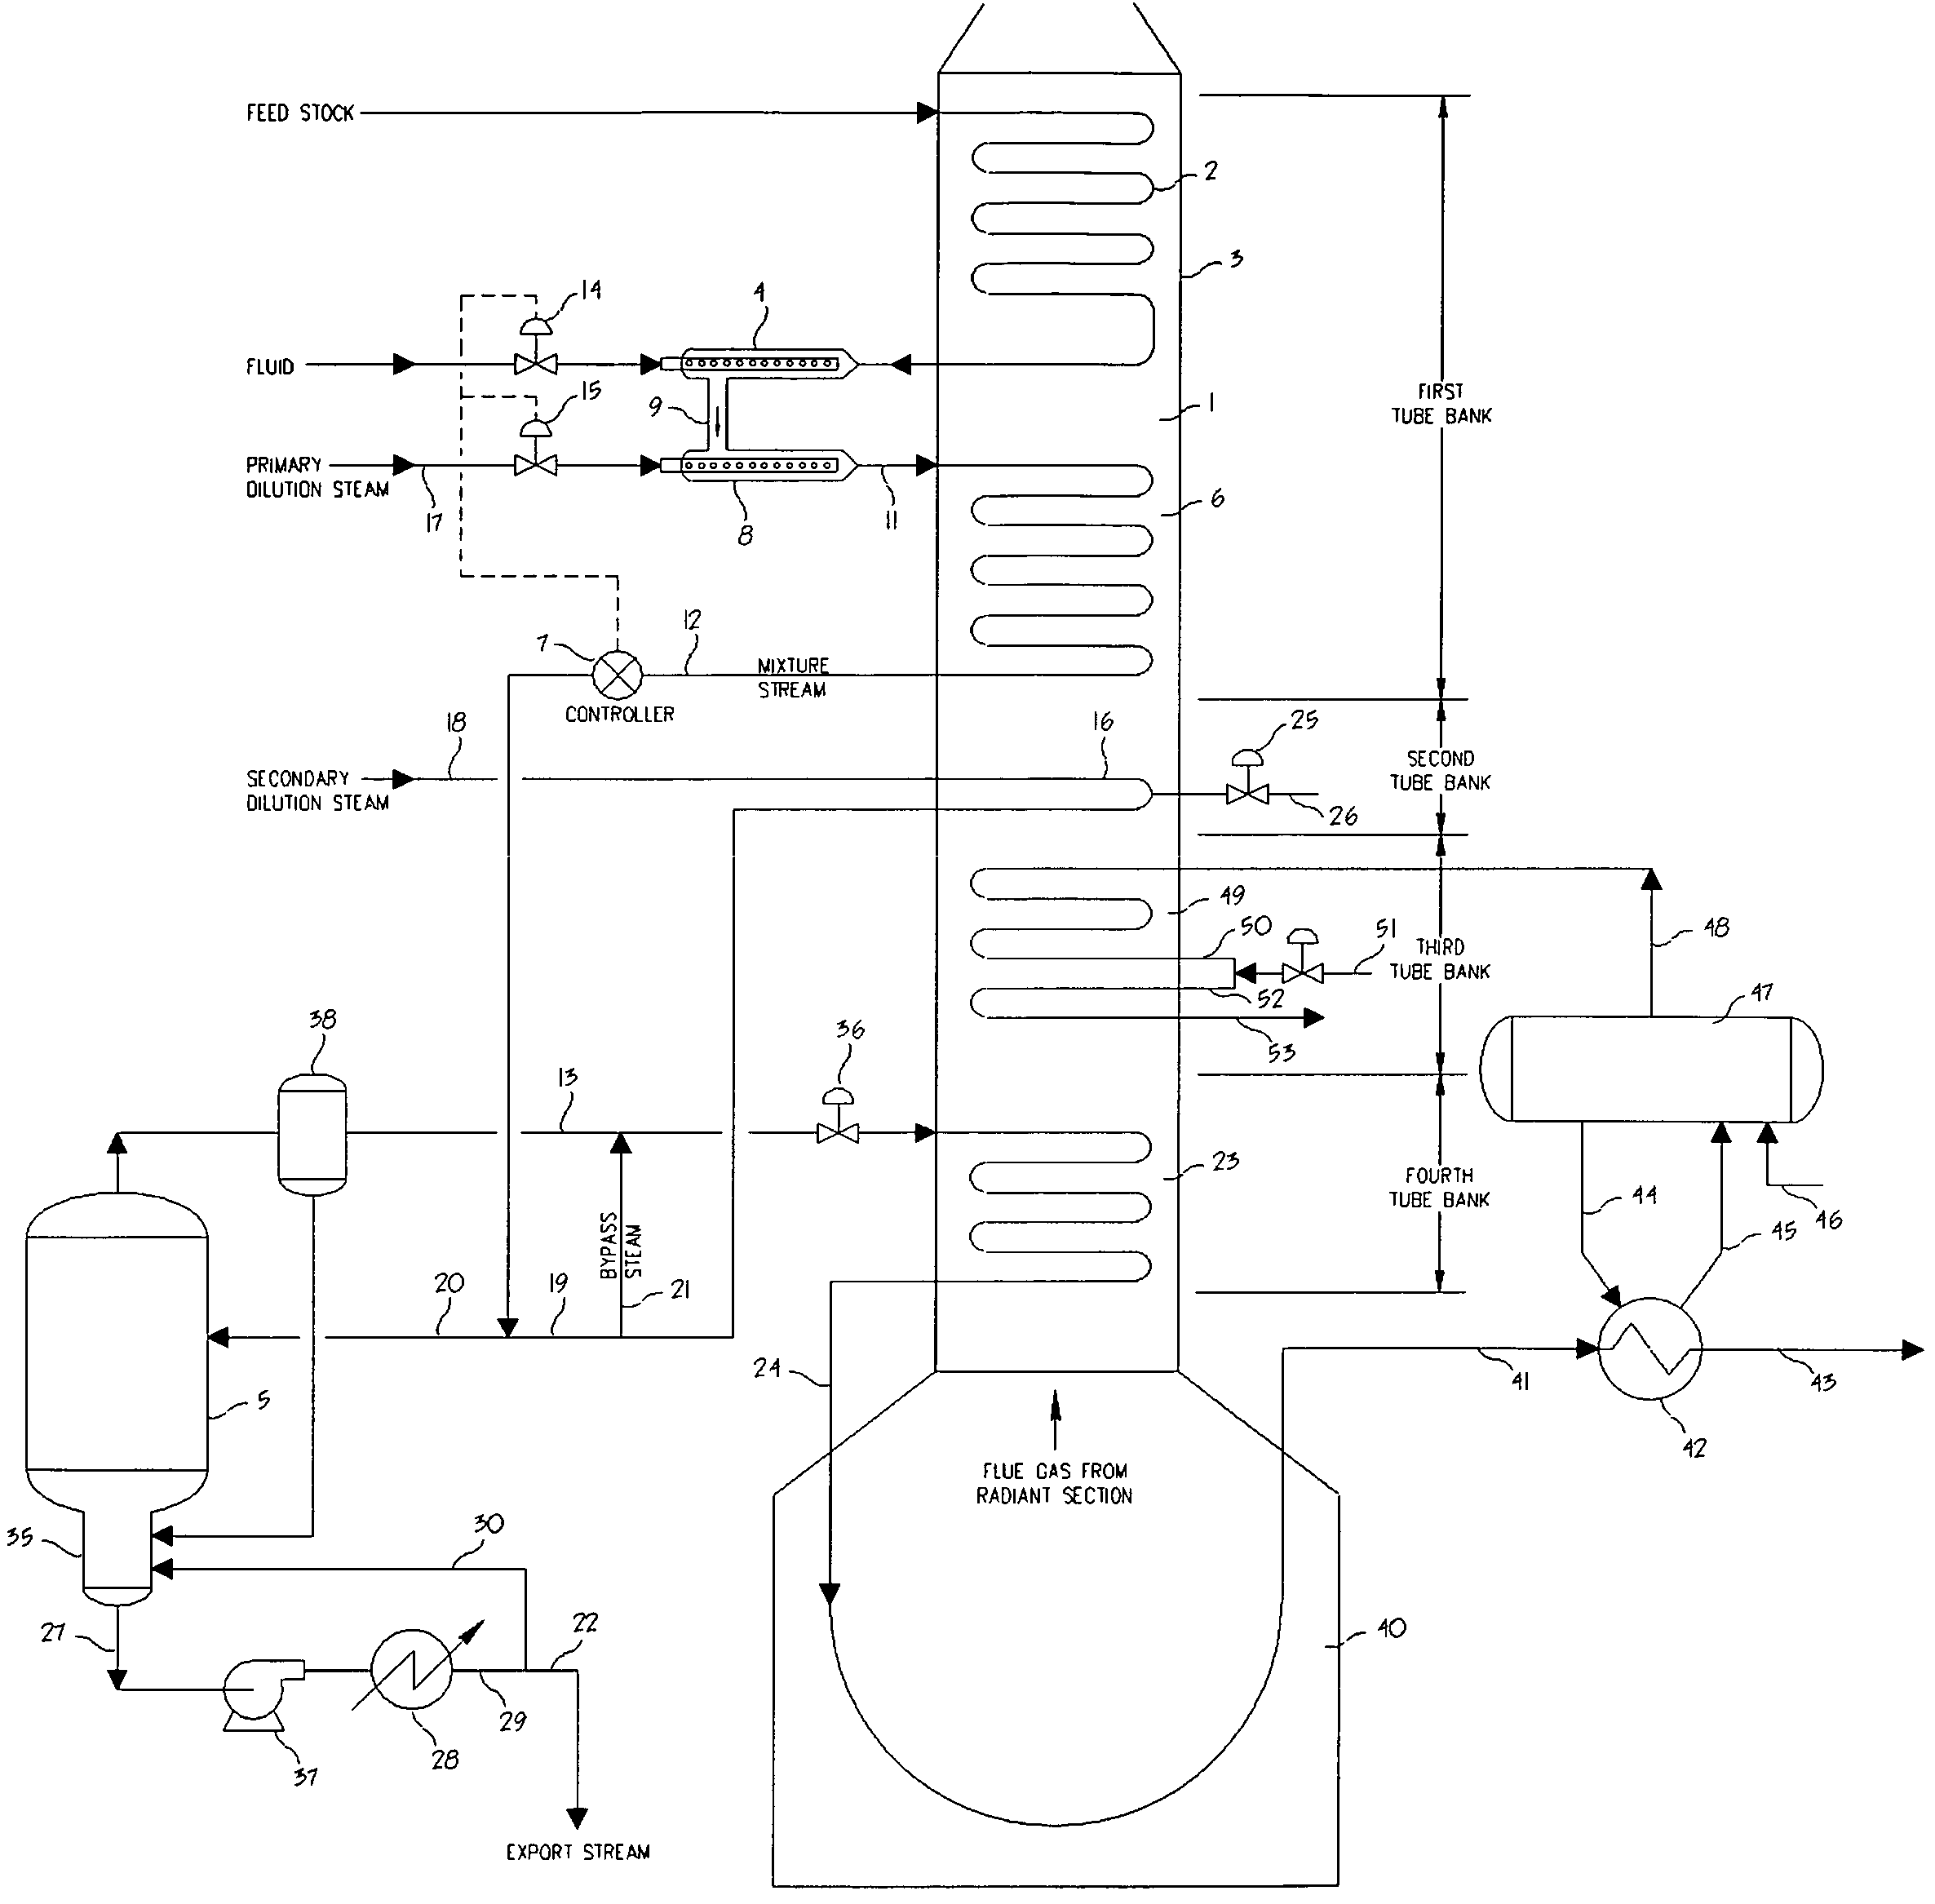 Process for steam cracking heavy hydrocarbon feedstocks